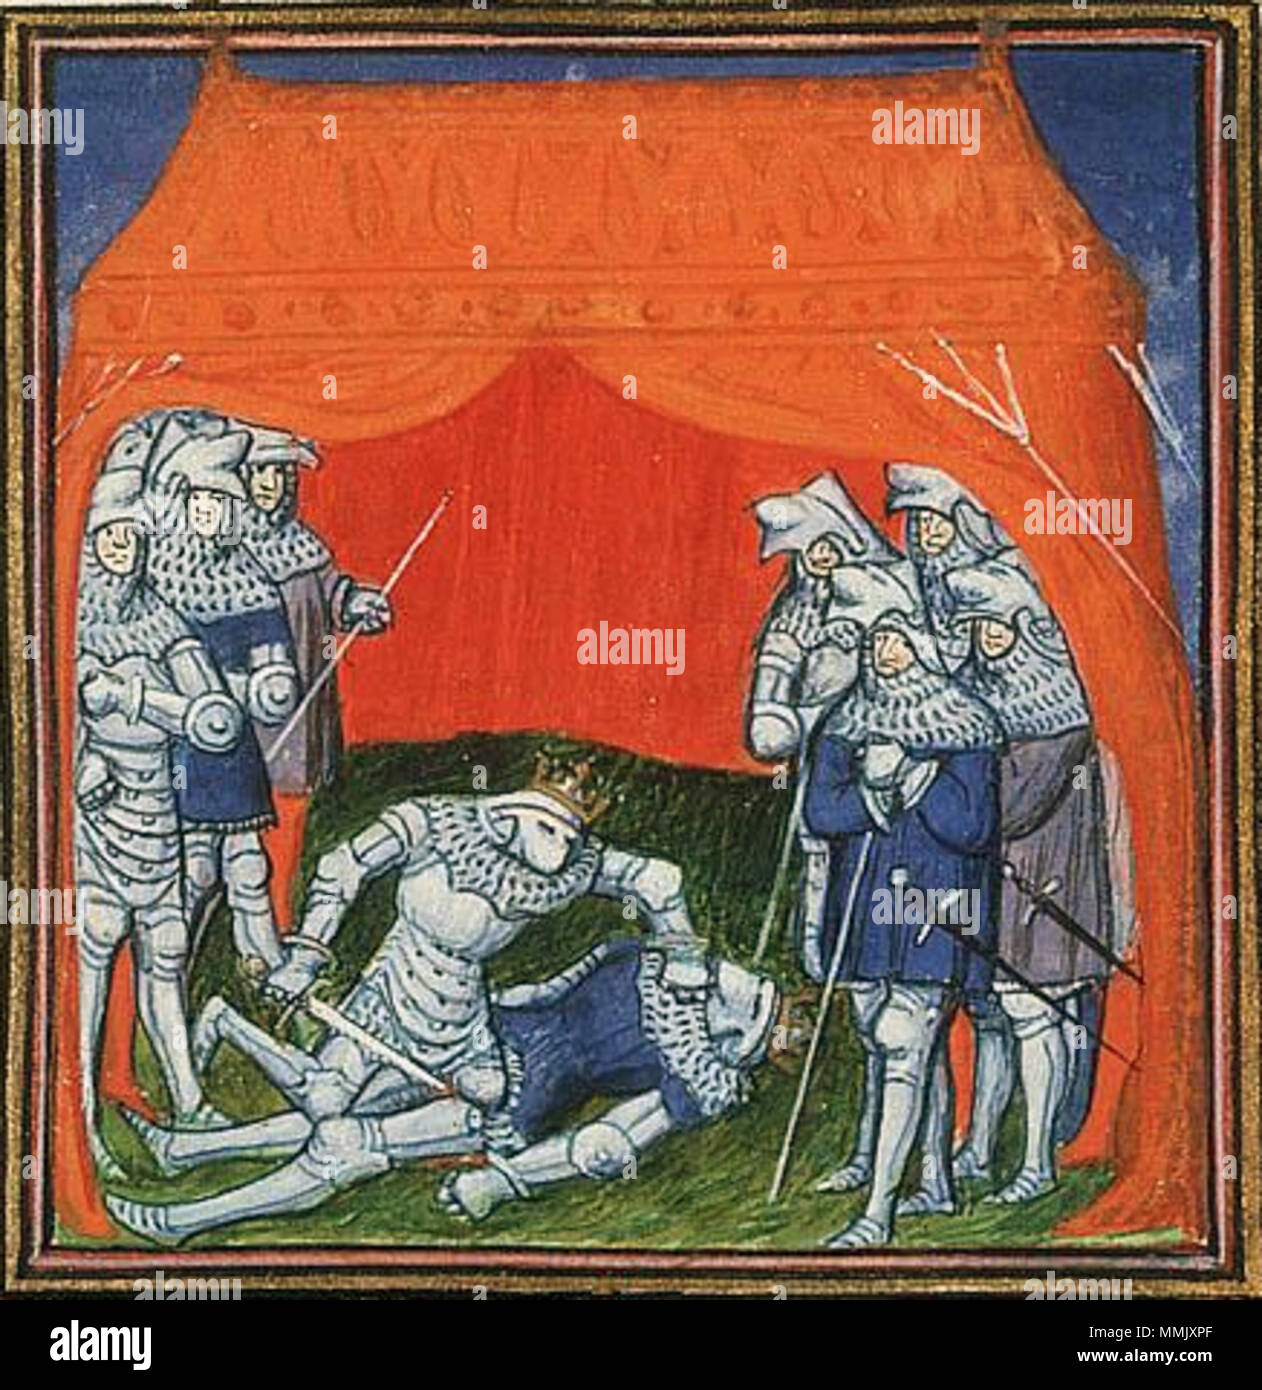 . English: Enrique of Transtamare kills his half-brother Pedro I, king of Leon and Castile Contents: Jean Froissart, Chroniques (Vol. I) Place of origin, date: Paris, Virgil Master (illuminator); c. 1410 Material: Vellum, ff. 382, 385x288 (243x187) mm, 42 lines, littera cursiva, Binding: 18th-century brown leather; gilt; with coat of arms of Stadholder William V Decoration: 1 two-column miniature (170x180 mm); 29 column miniatures (115/65x95/80 mm); 1 historiated initial (45x50 mm); decorated initials with border decoration (ff. 1r, 24r, 36r, 62r, 74v, etc.) Provenance: Louis de Luxemburg, con Stock Photo